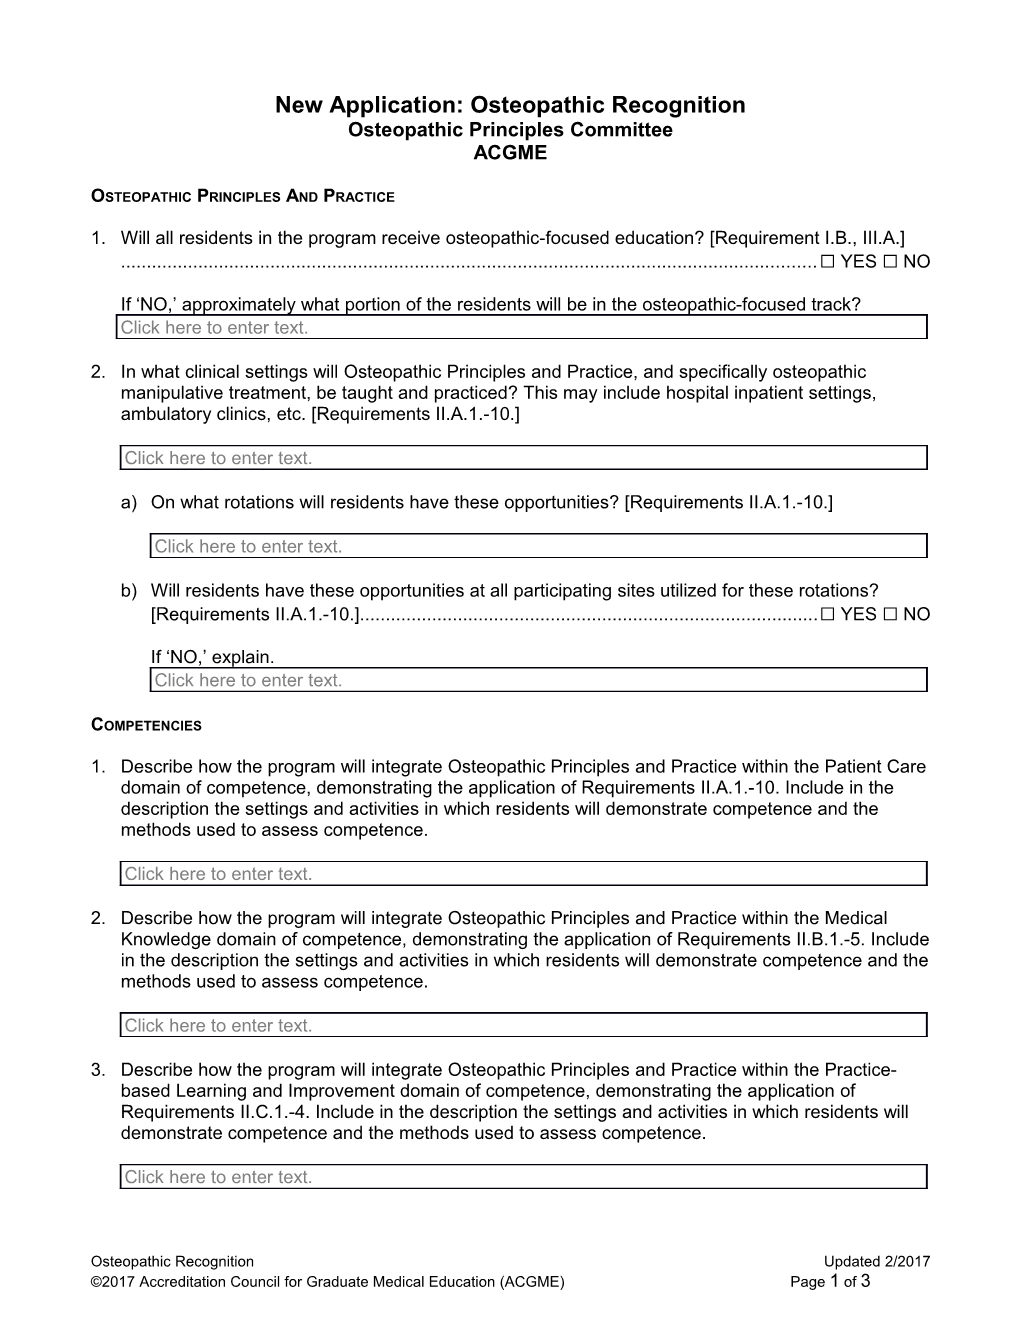 Osteopathic Recognition Application